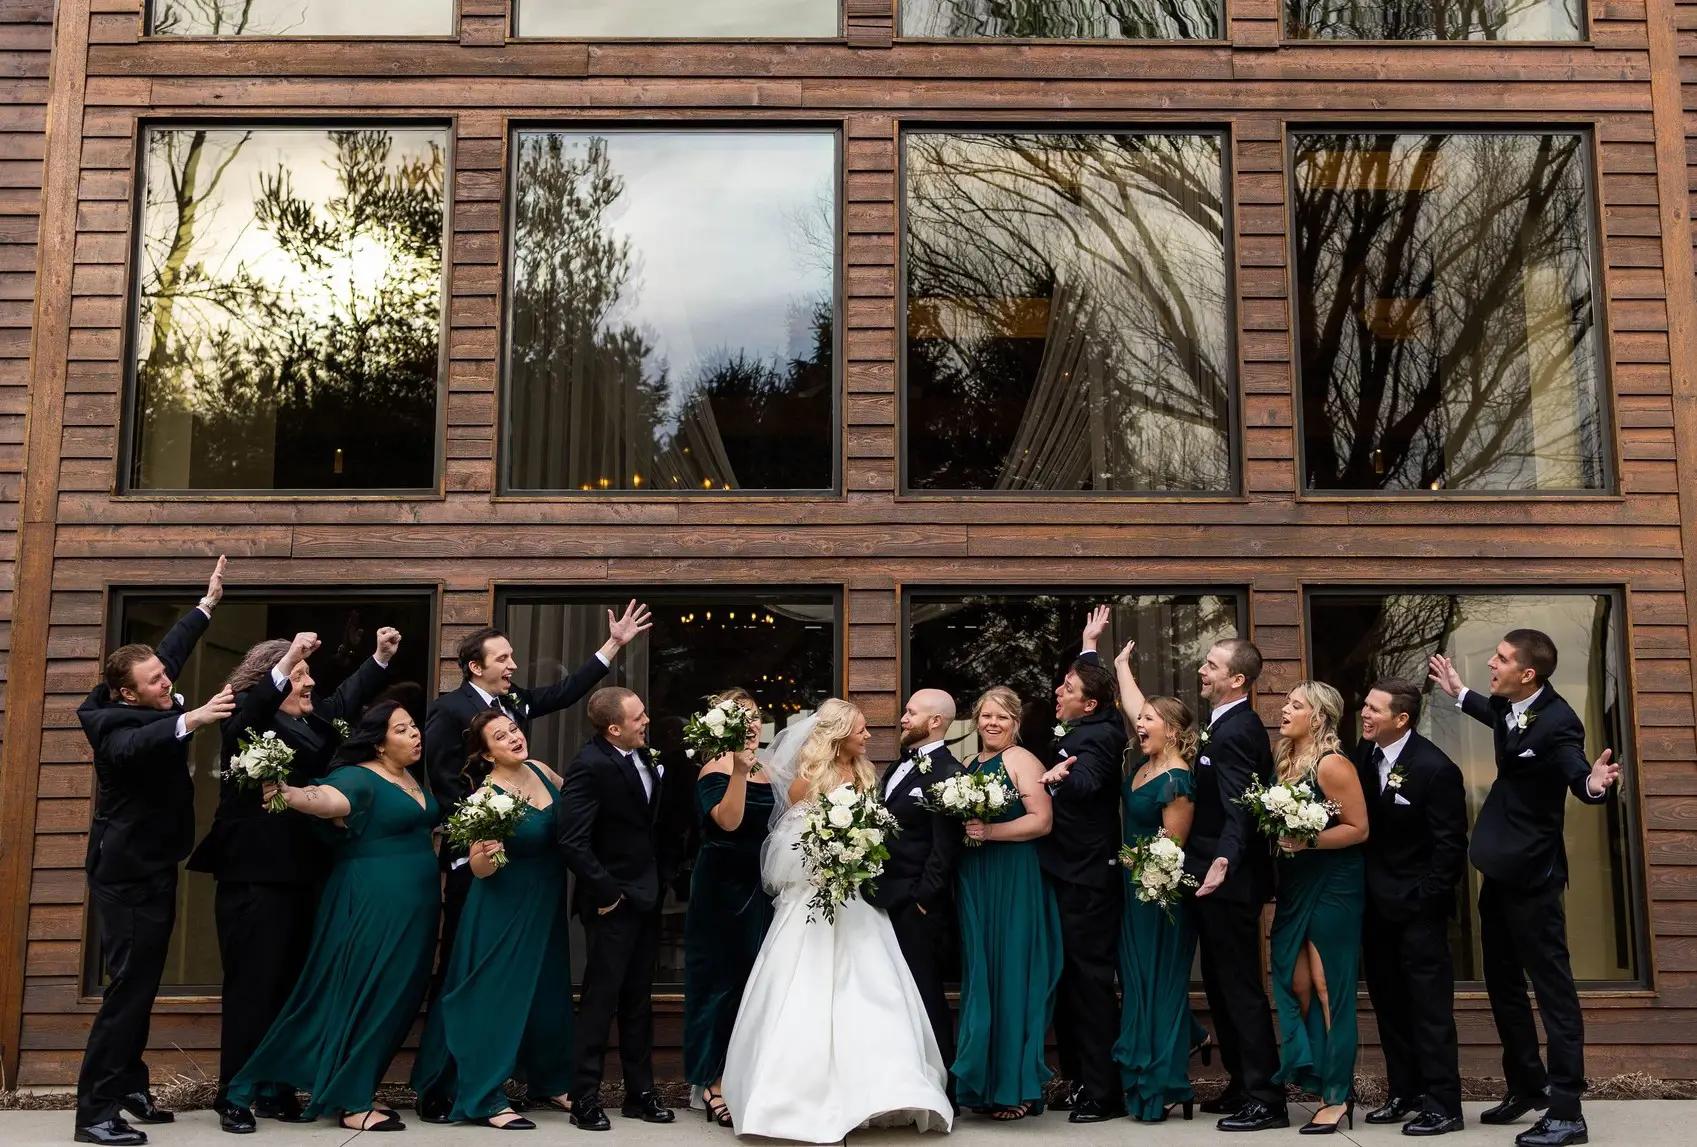 5 Tips to Secure the Best Photographs of Your Bridal Party Image